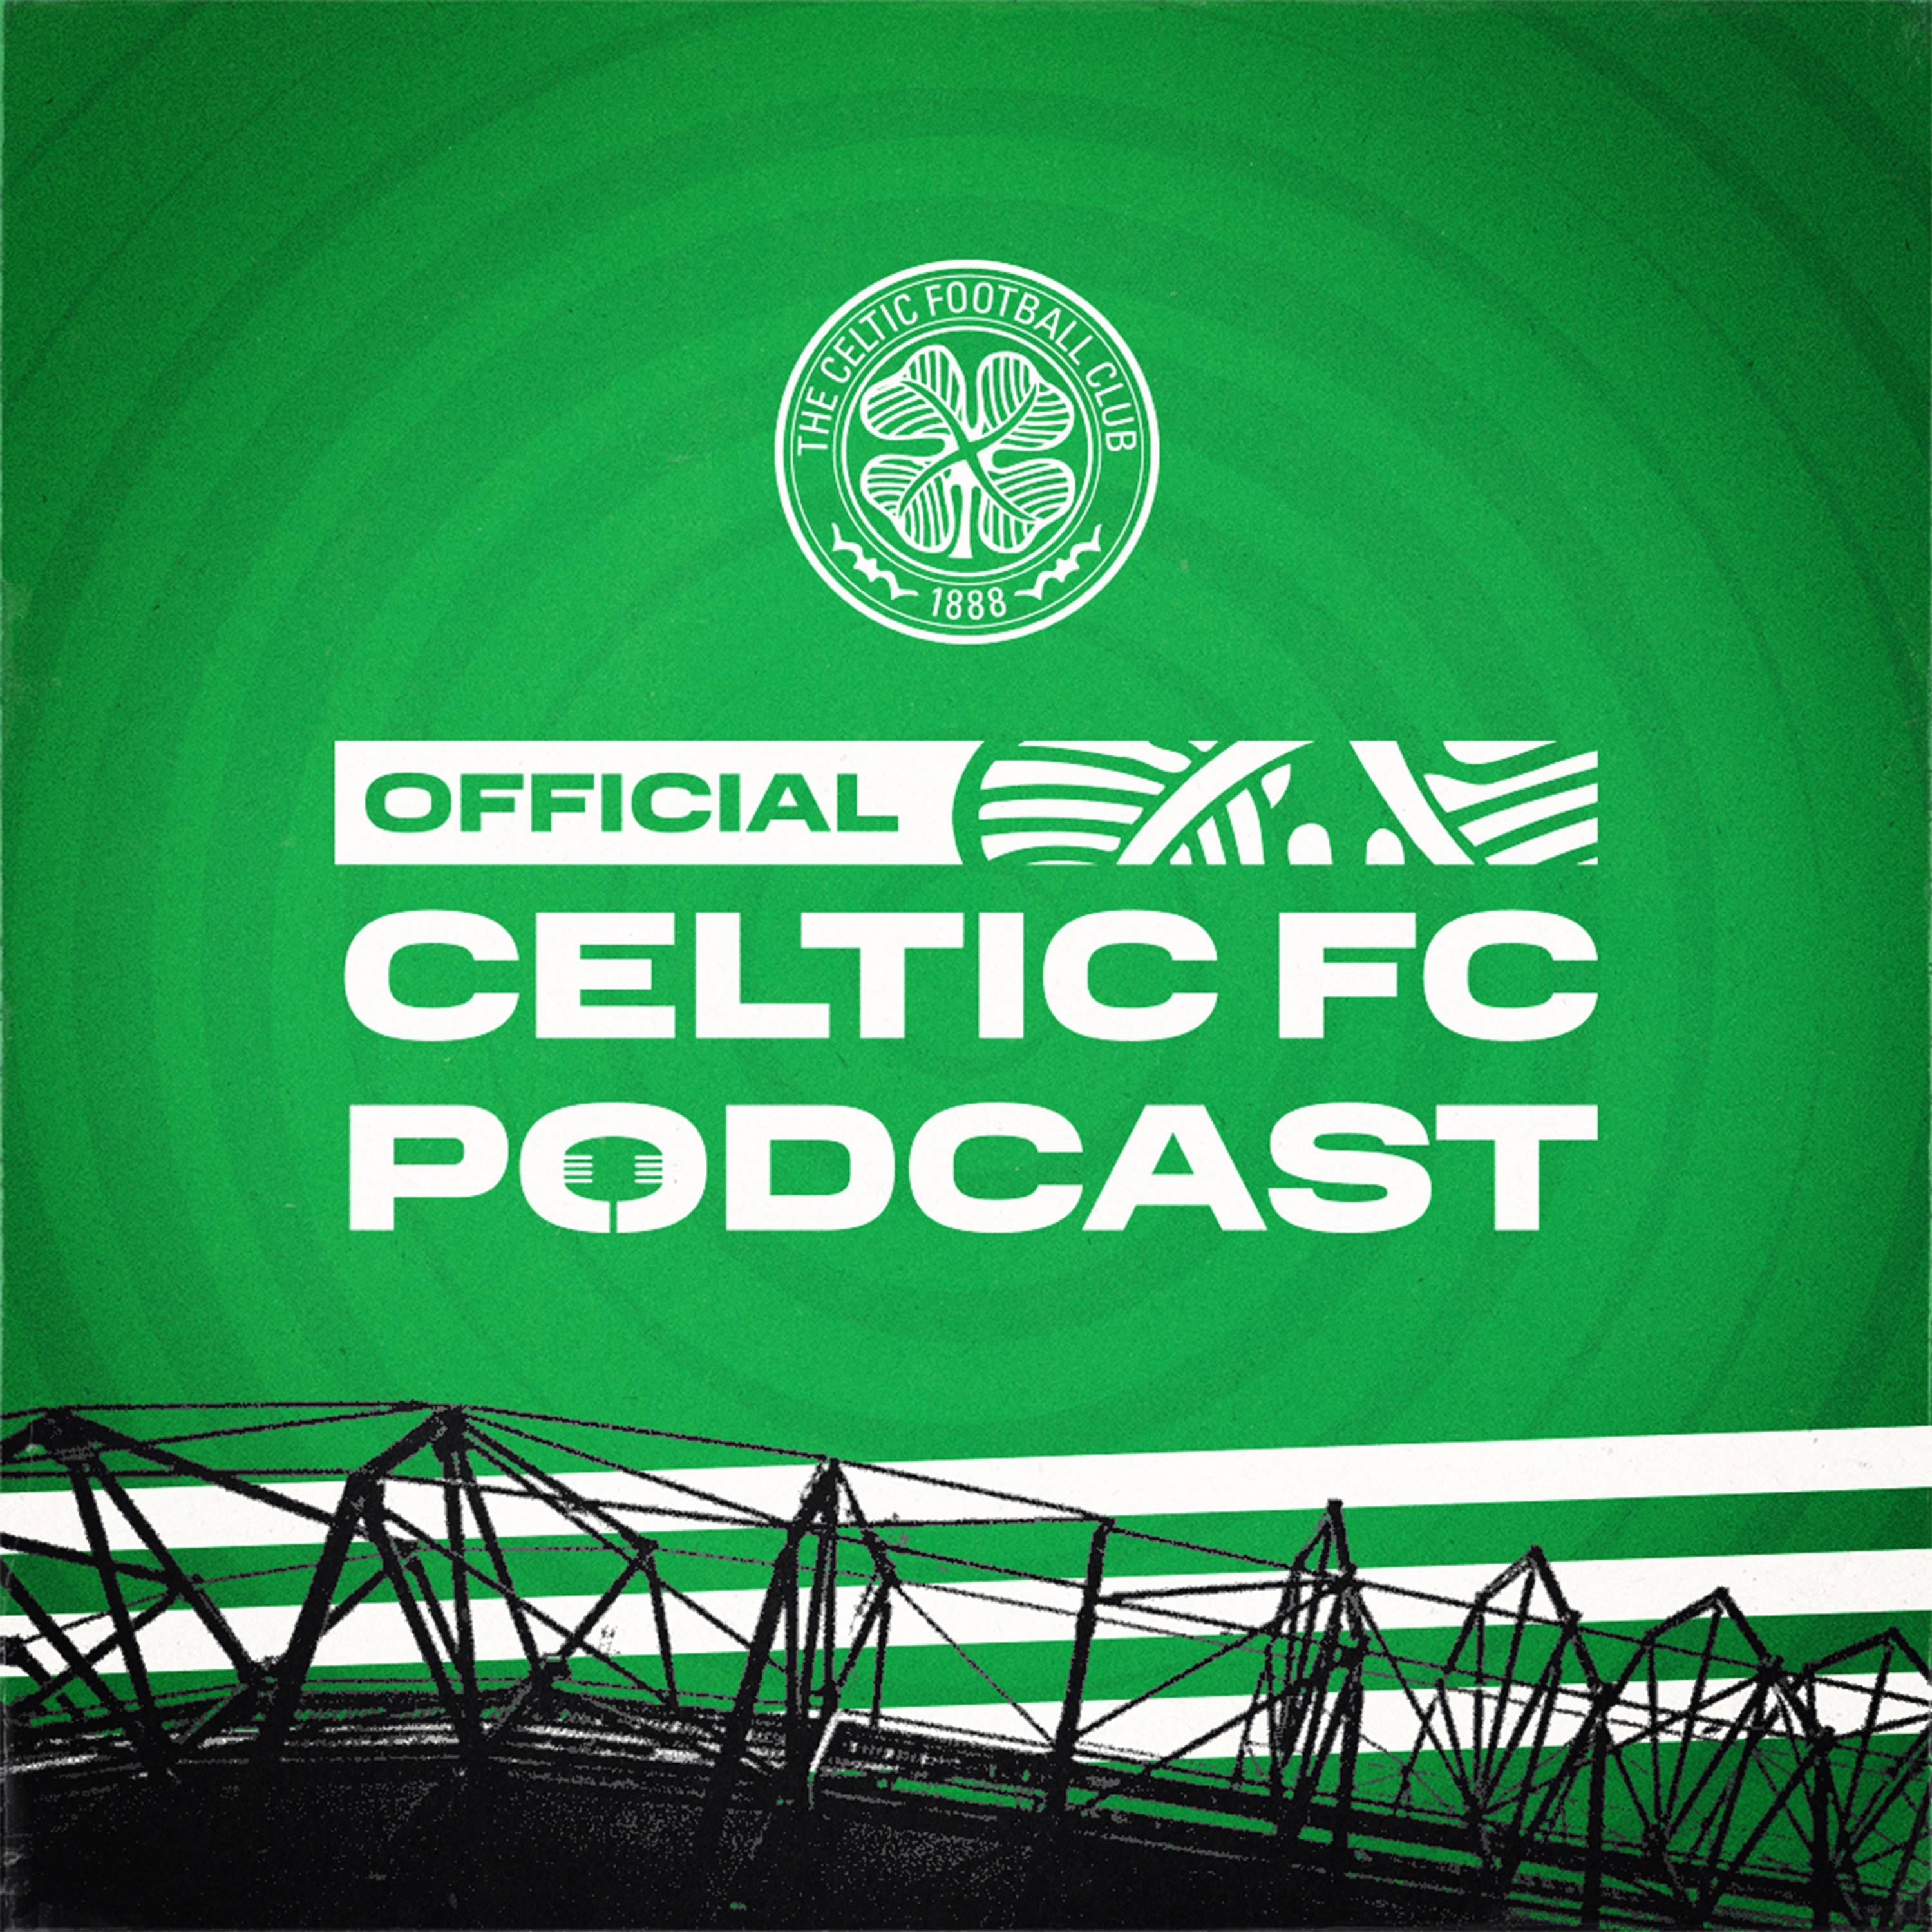 POST-MATCH PODCAST: Reaction as Celtic held to draw with Motherwell after David Turnbull penalty